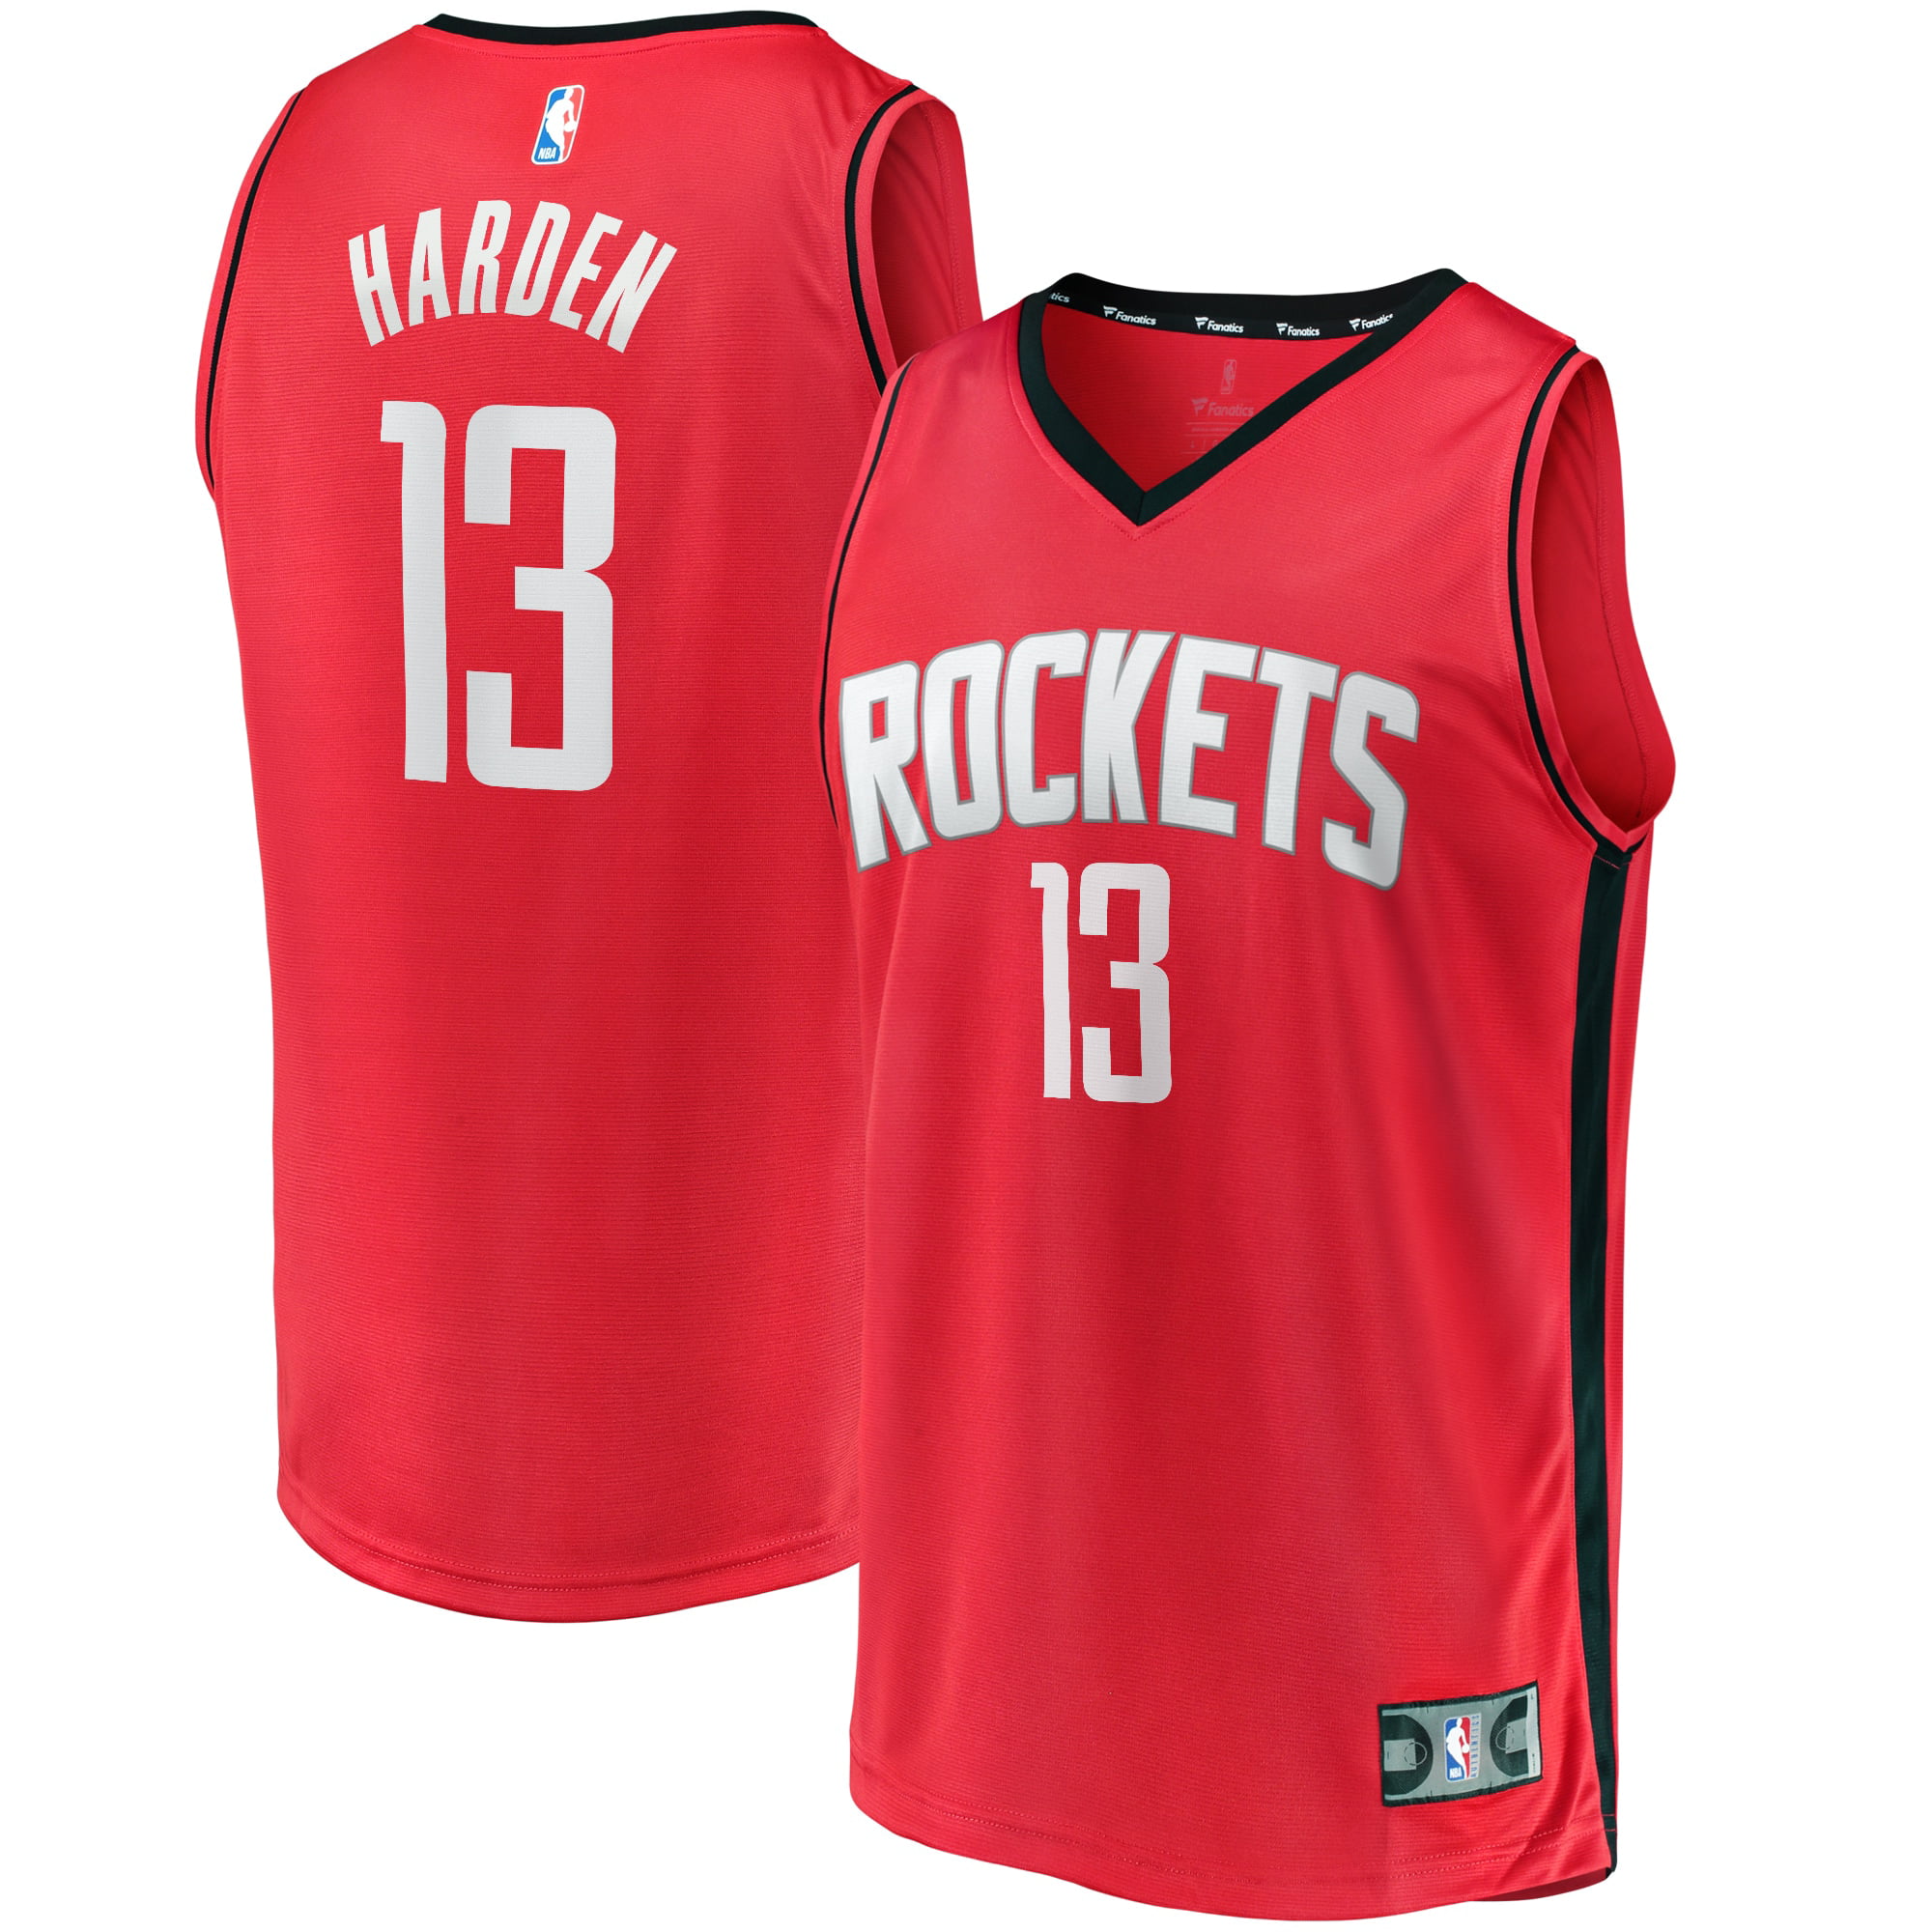 james harden youth jersey